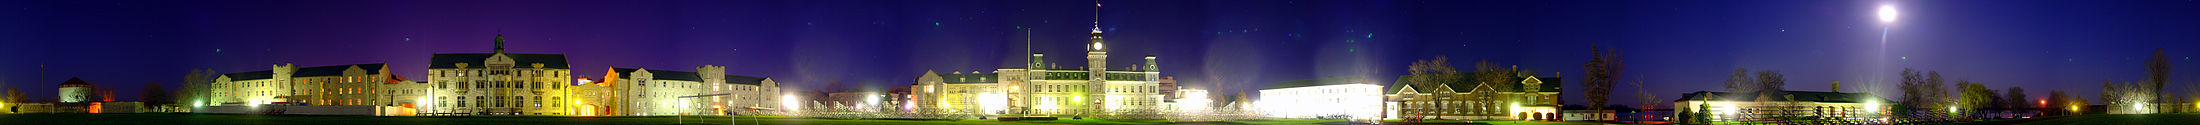 Collège Militaire Royal du Canada - Panorama Central.jpg